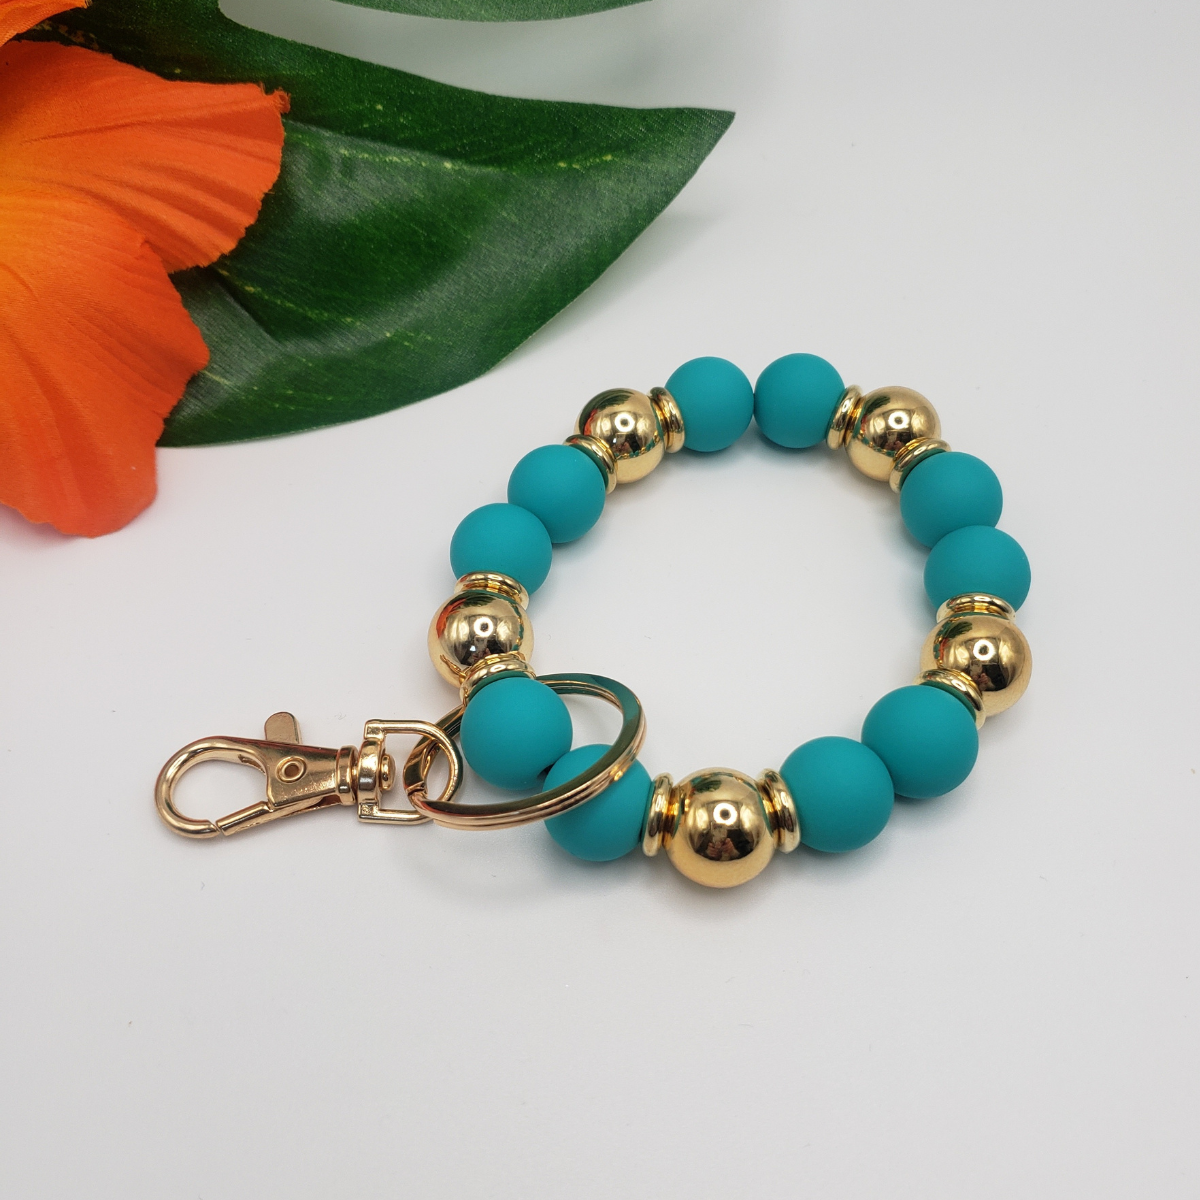 A Gold and Color Bead KeyChain by Ganz Inc with a flower in the background.